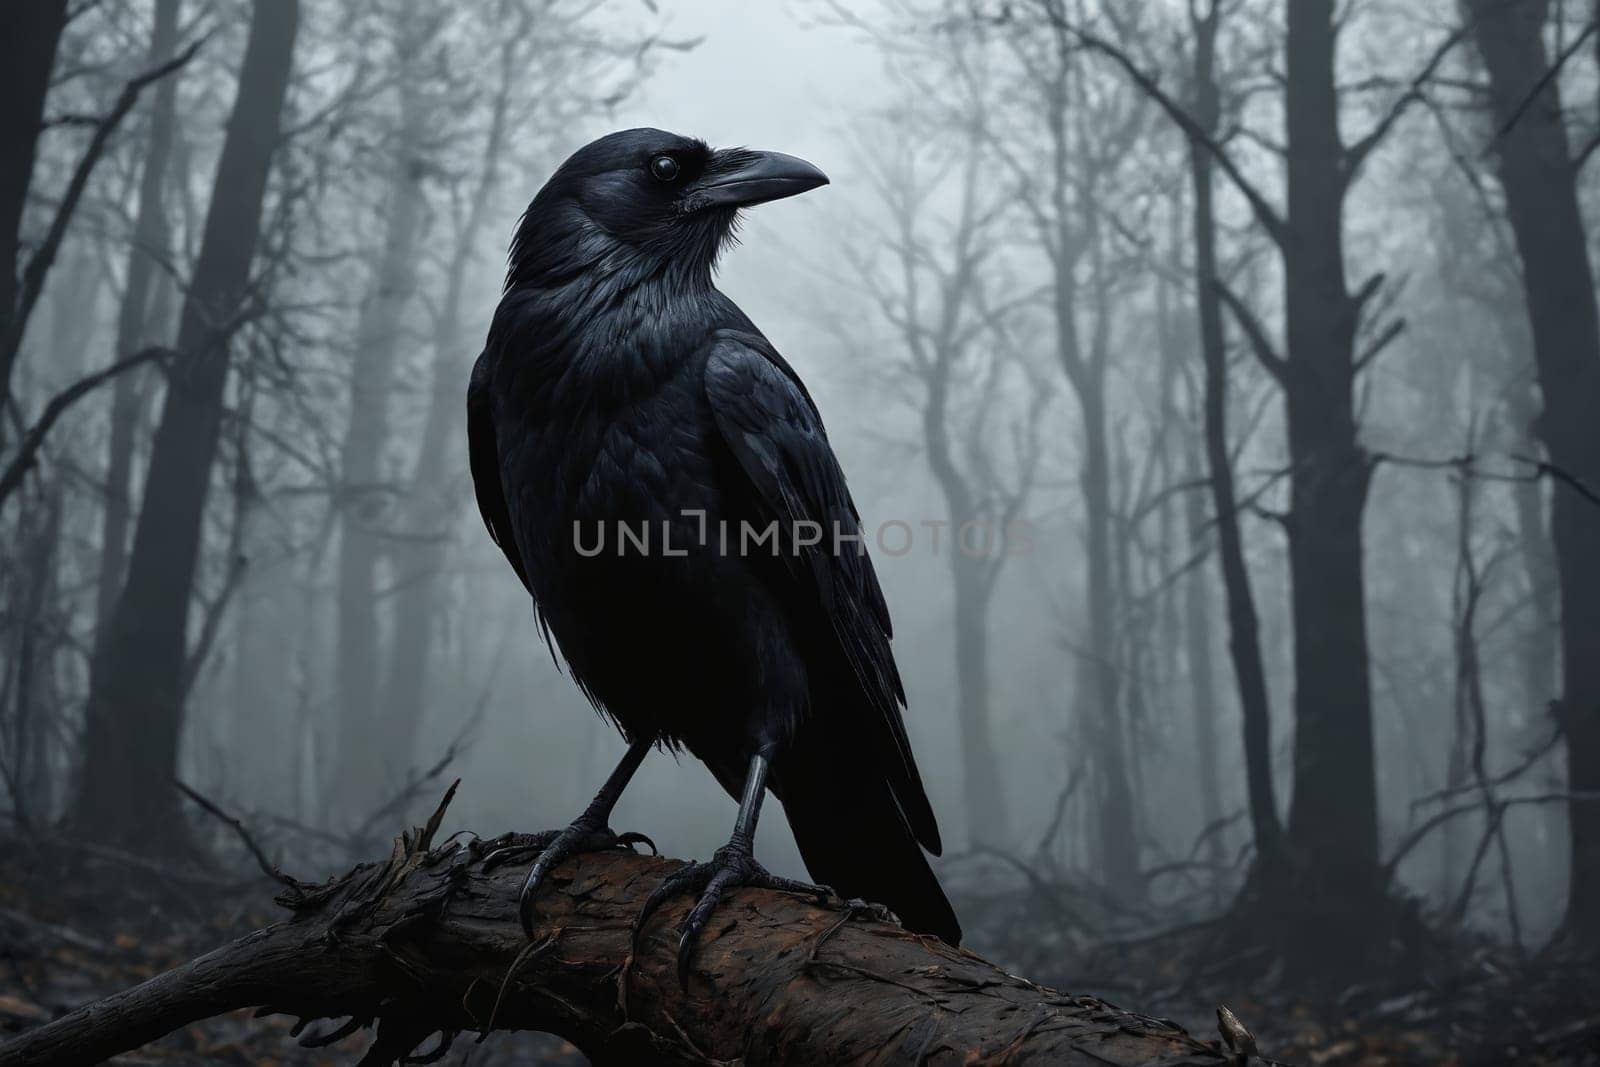 The dark and moody ambiance overwhelms as a spectacular raven becomes the centerpiece, standing on what appears to be lifeless foliage, while a foggy, leafless forest provides a chilling backdrop.